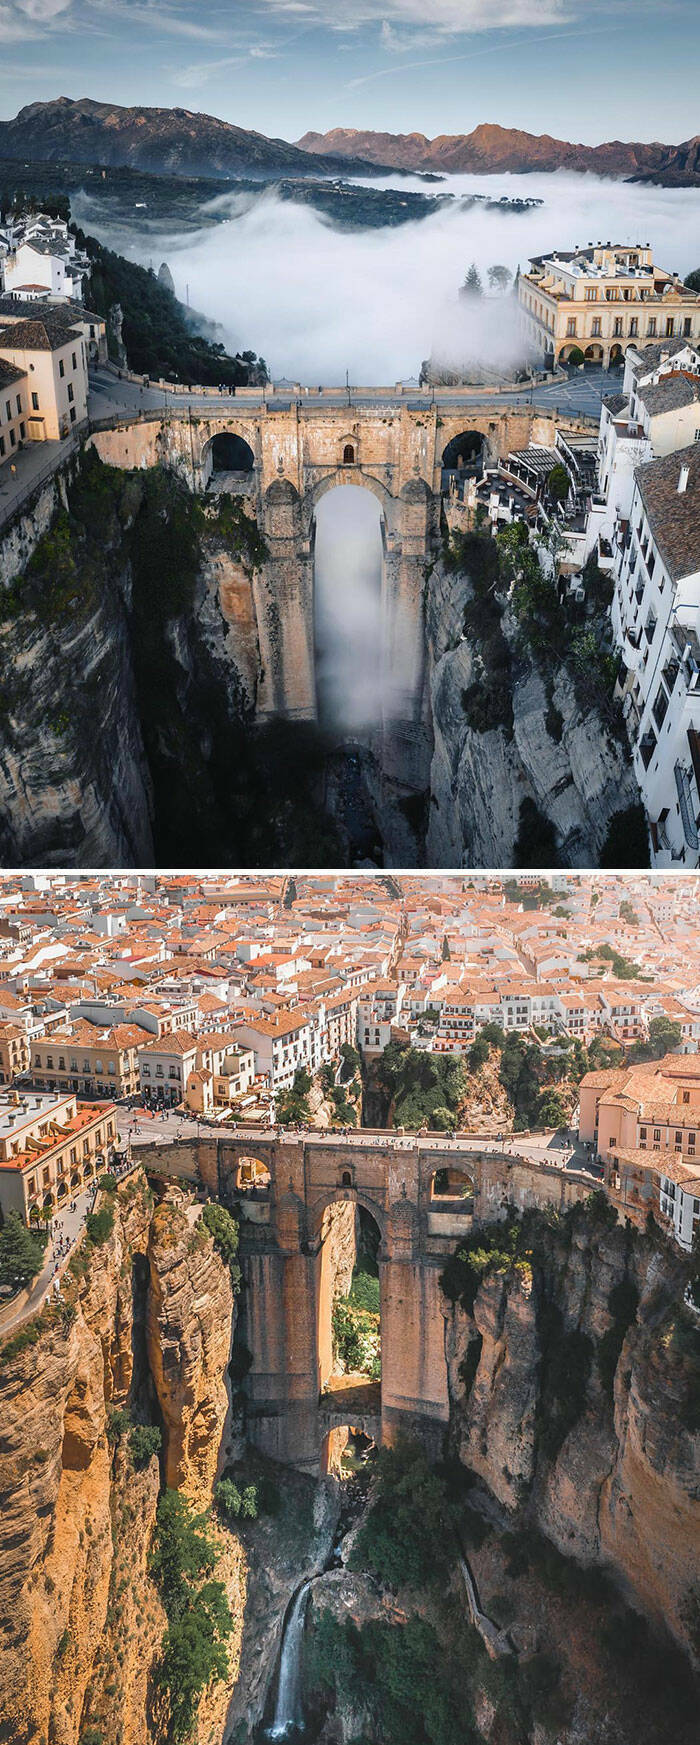 Spain Is Such A Marvelous Place!